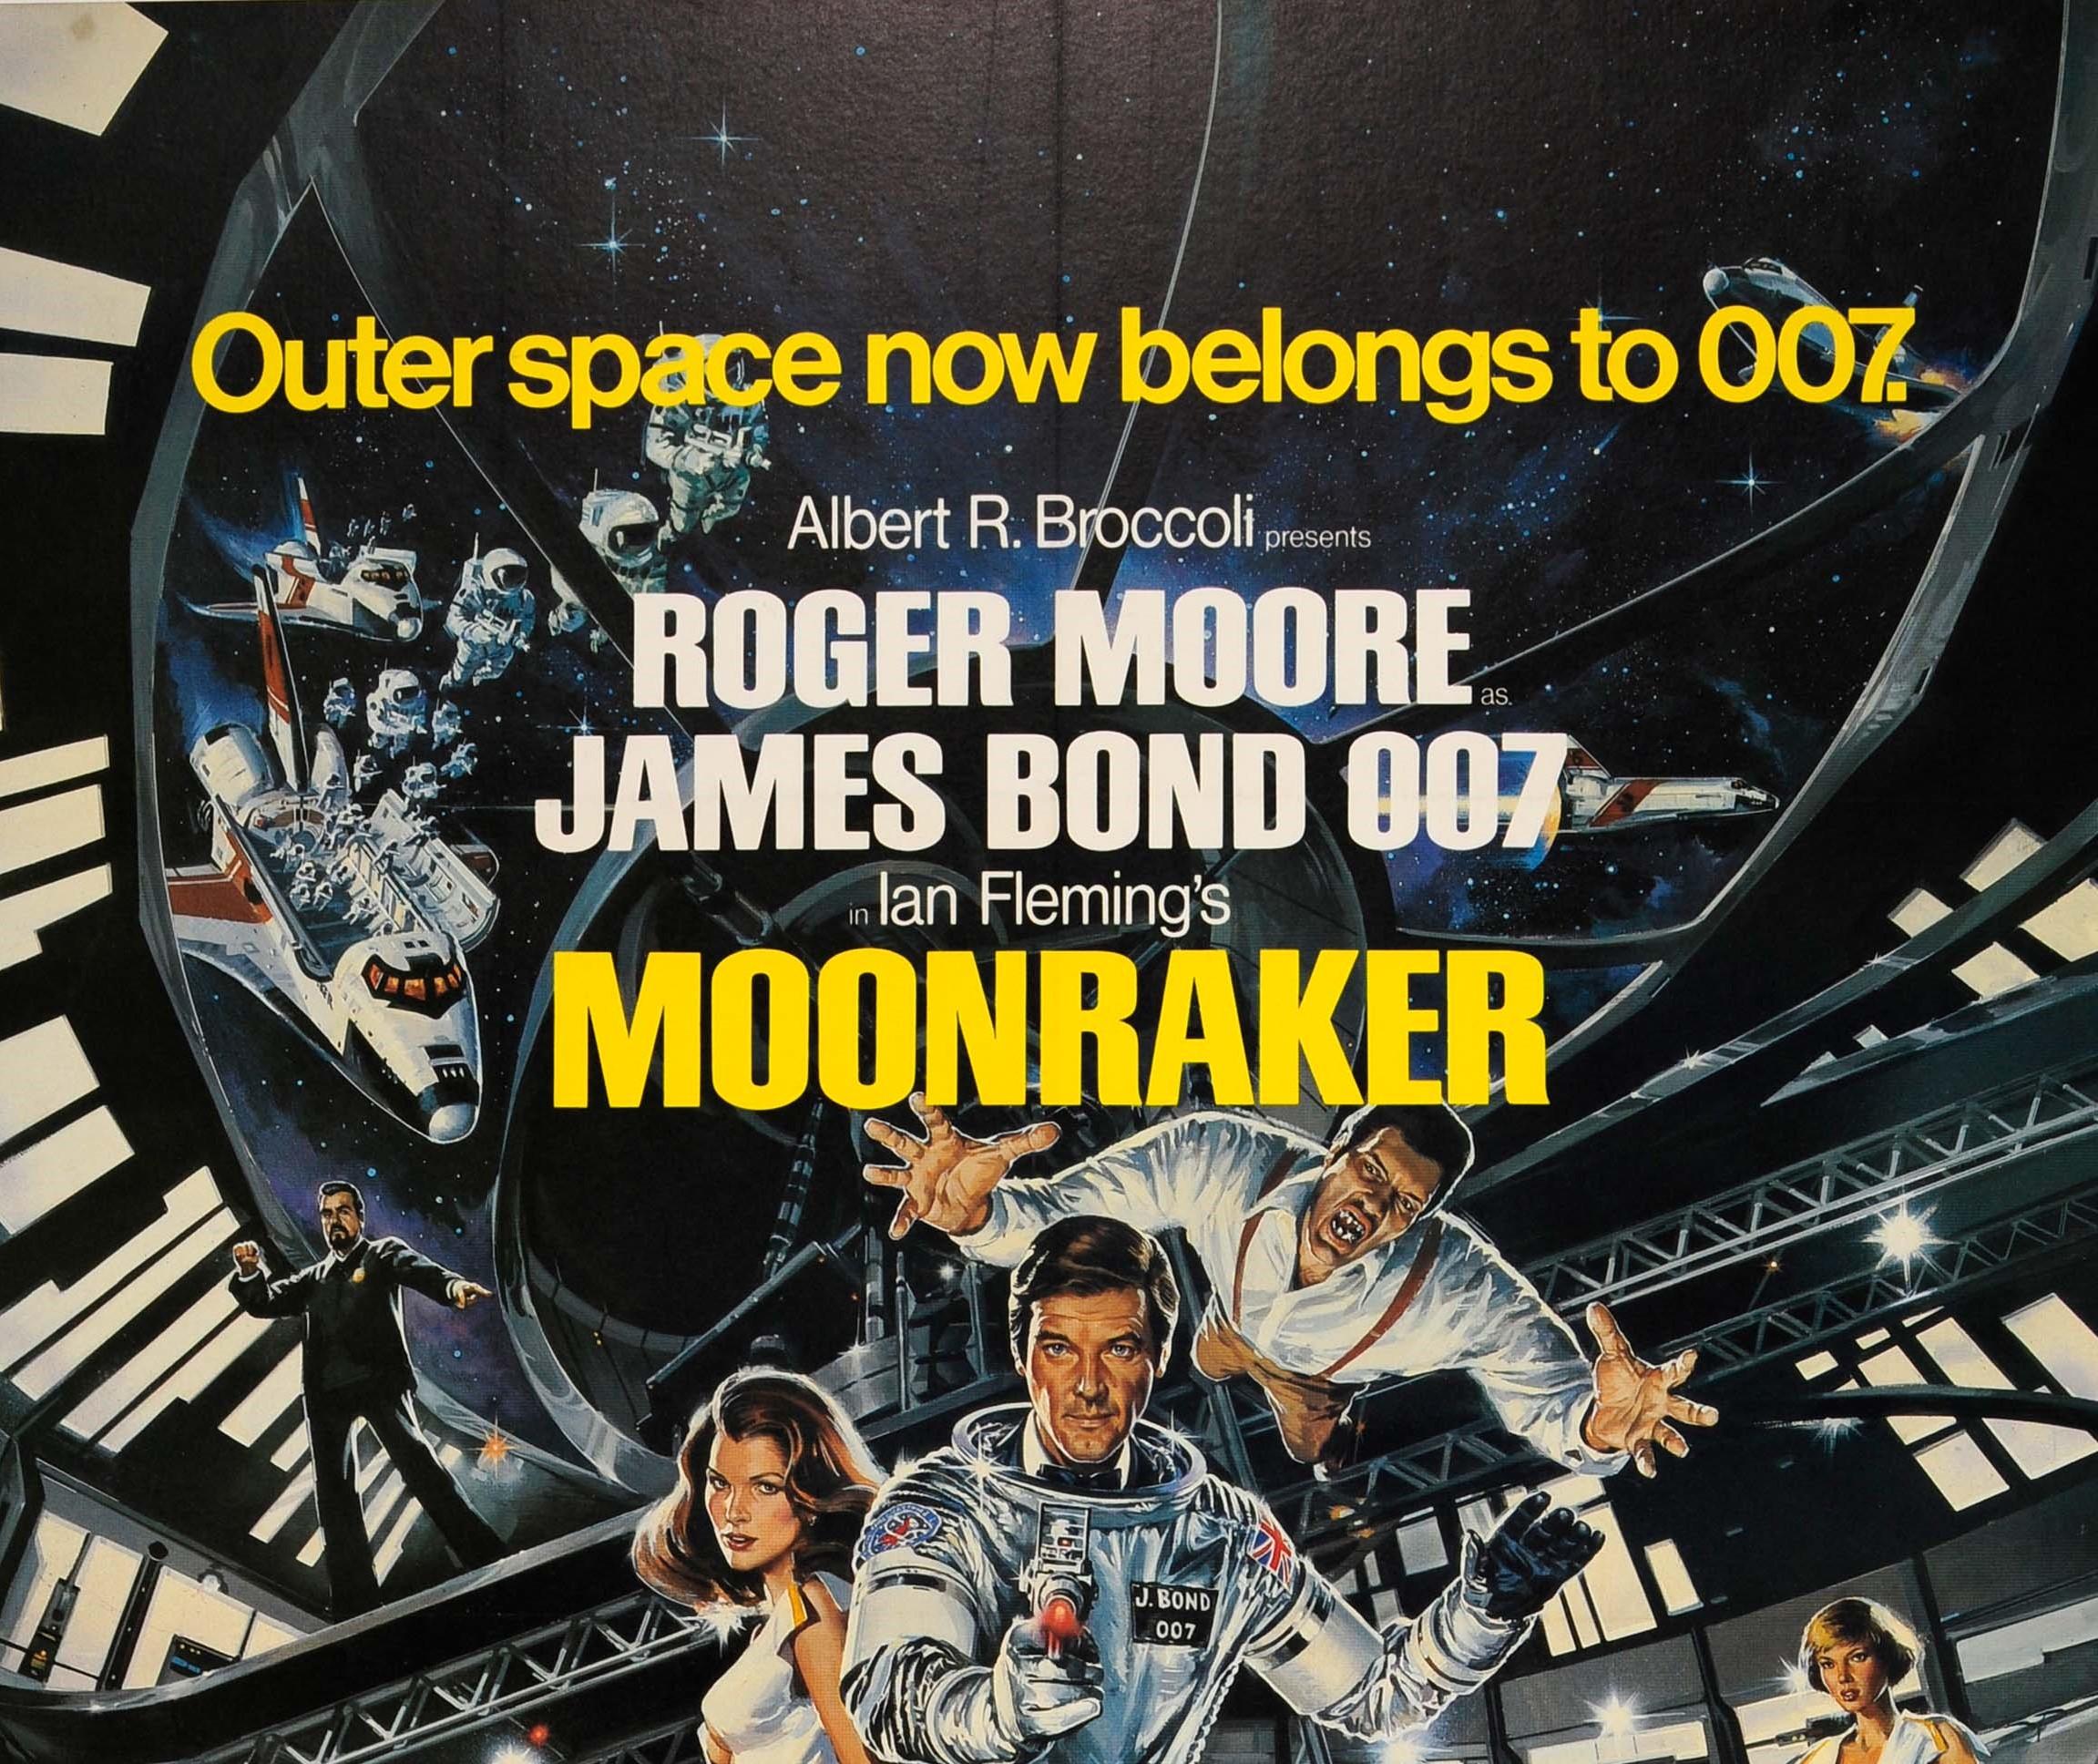 Original vintage cinema poster for the 007 James Bond movie Moonraker starring Roger Moore, Lois Chiles (Holly Goodhead), Michael Lonsdale (Hugo Drax) and Richard Kiel (Jaws) - Outer space now belongs to 007 - directed by Lewis Gilbert. Great image